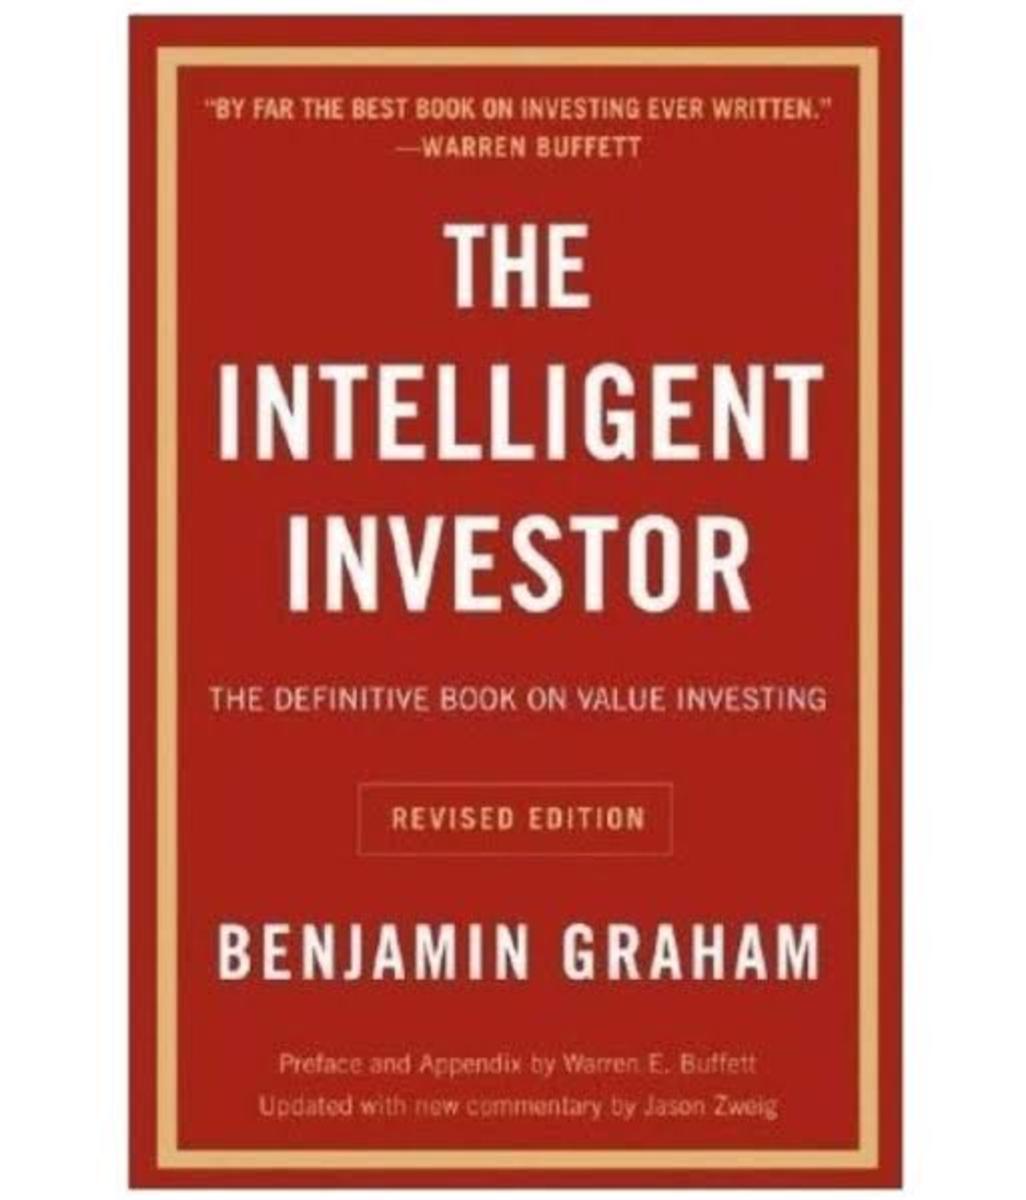 top-10-investment-books